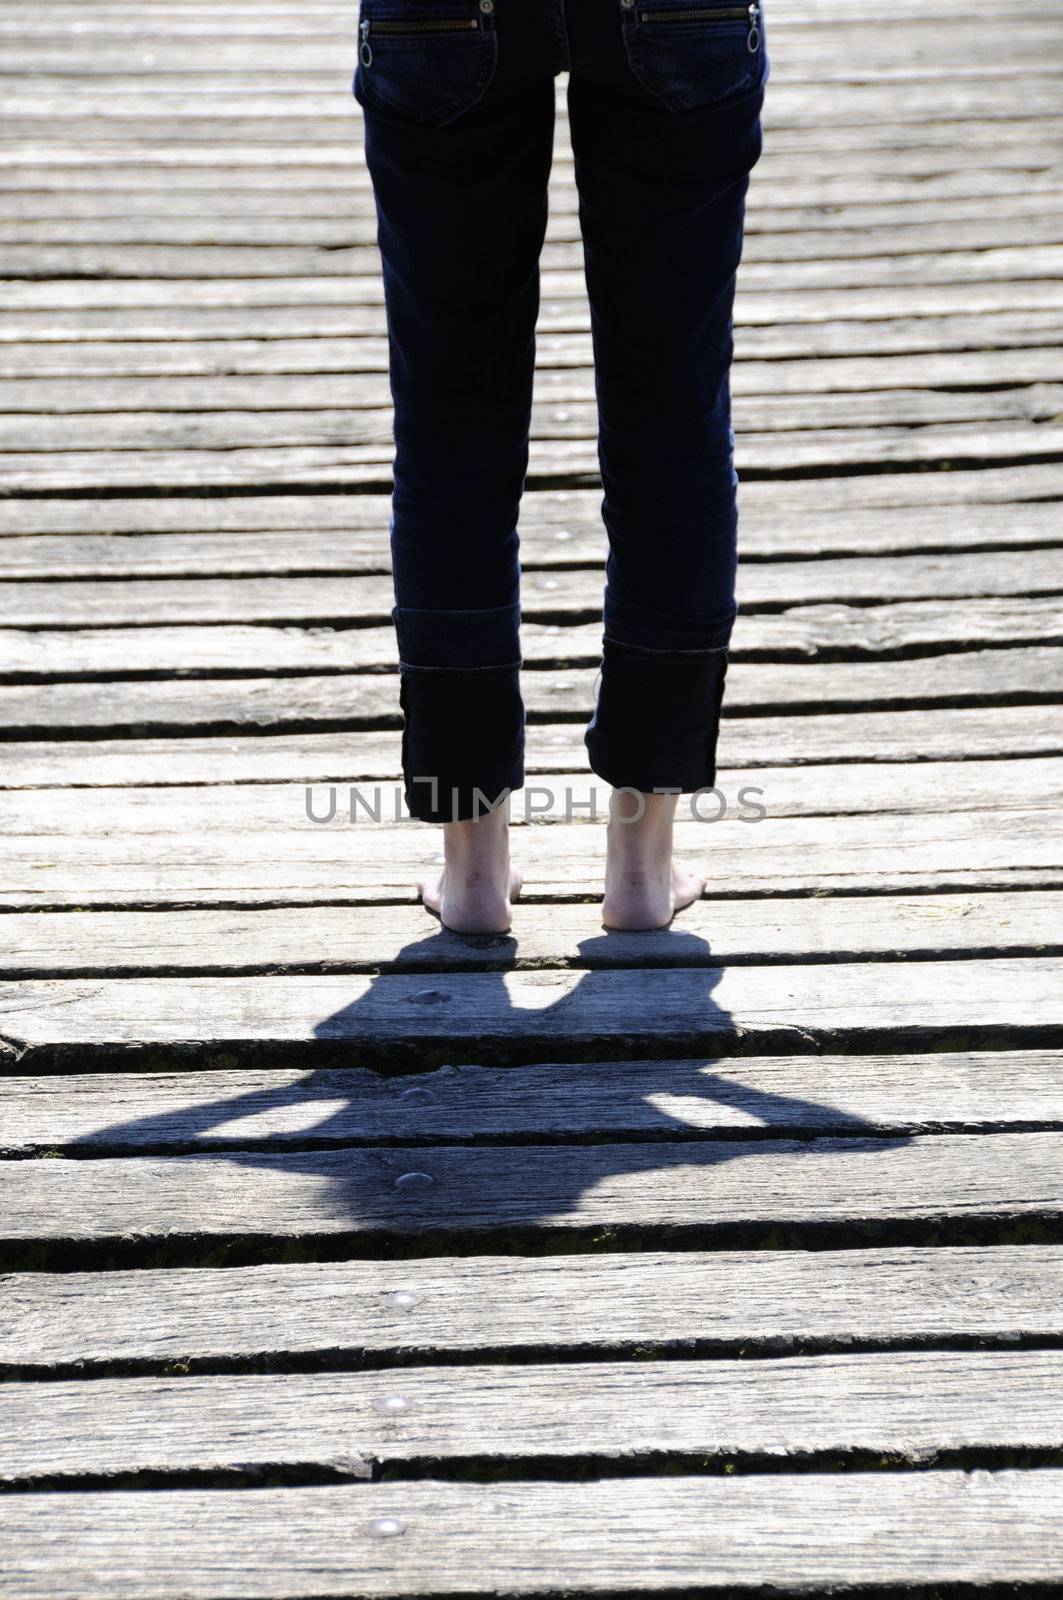 Young woman standing on wooden planks. Focus is on her shadow.